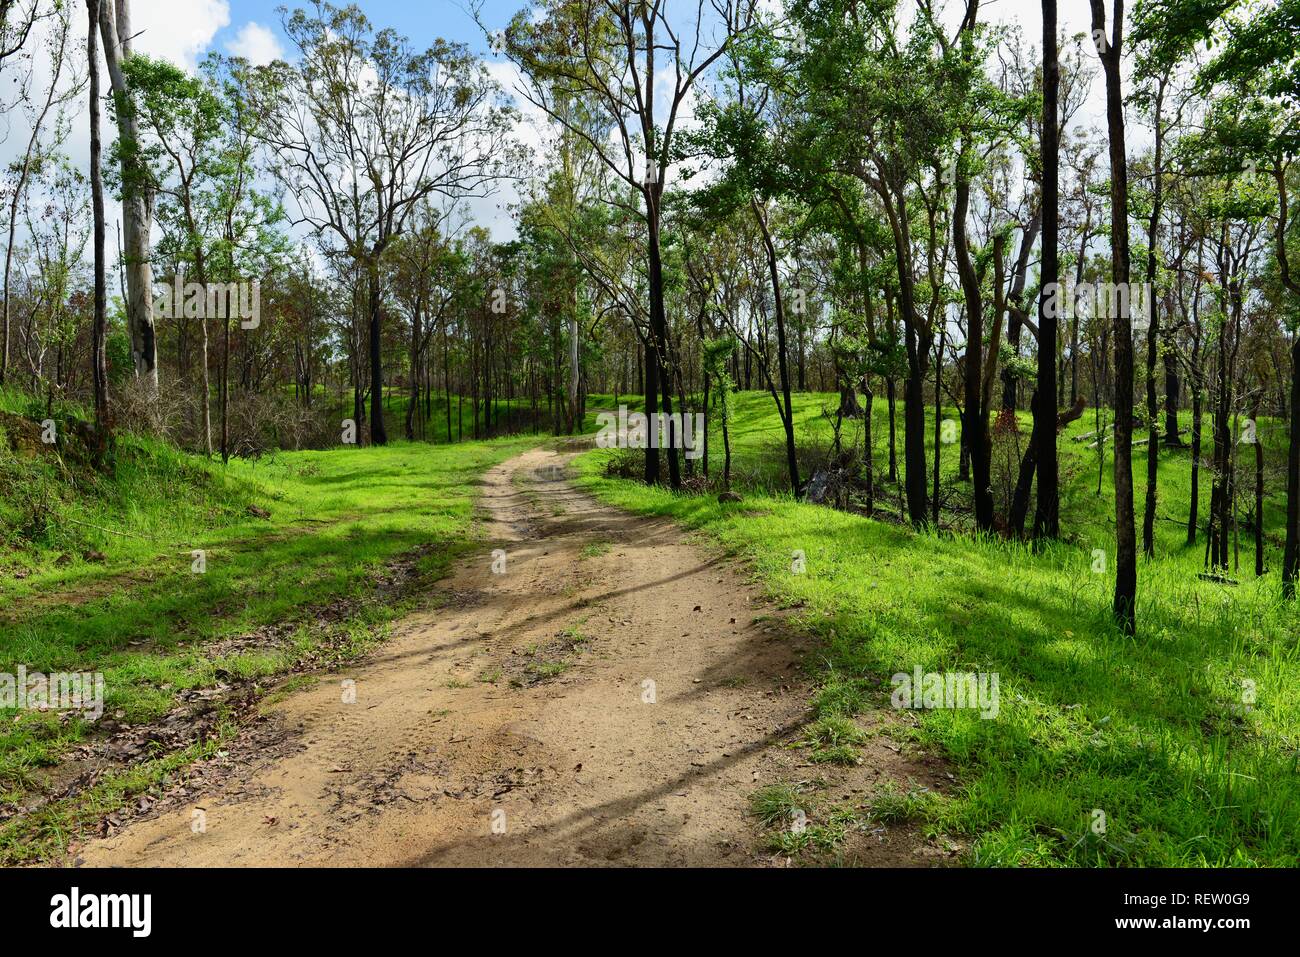 Fire damage and regrowth in Mia Mia State Forest after the November 2018 fires, Queensland, Australia Stock Photo